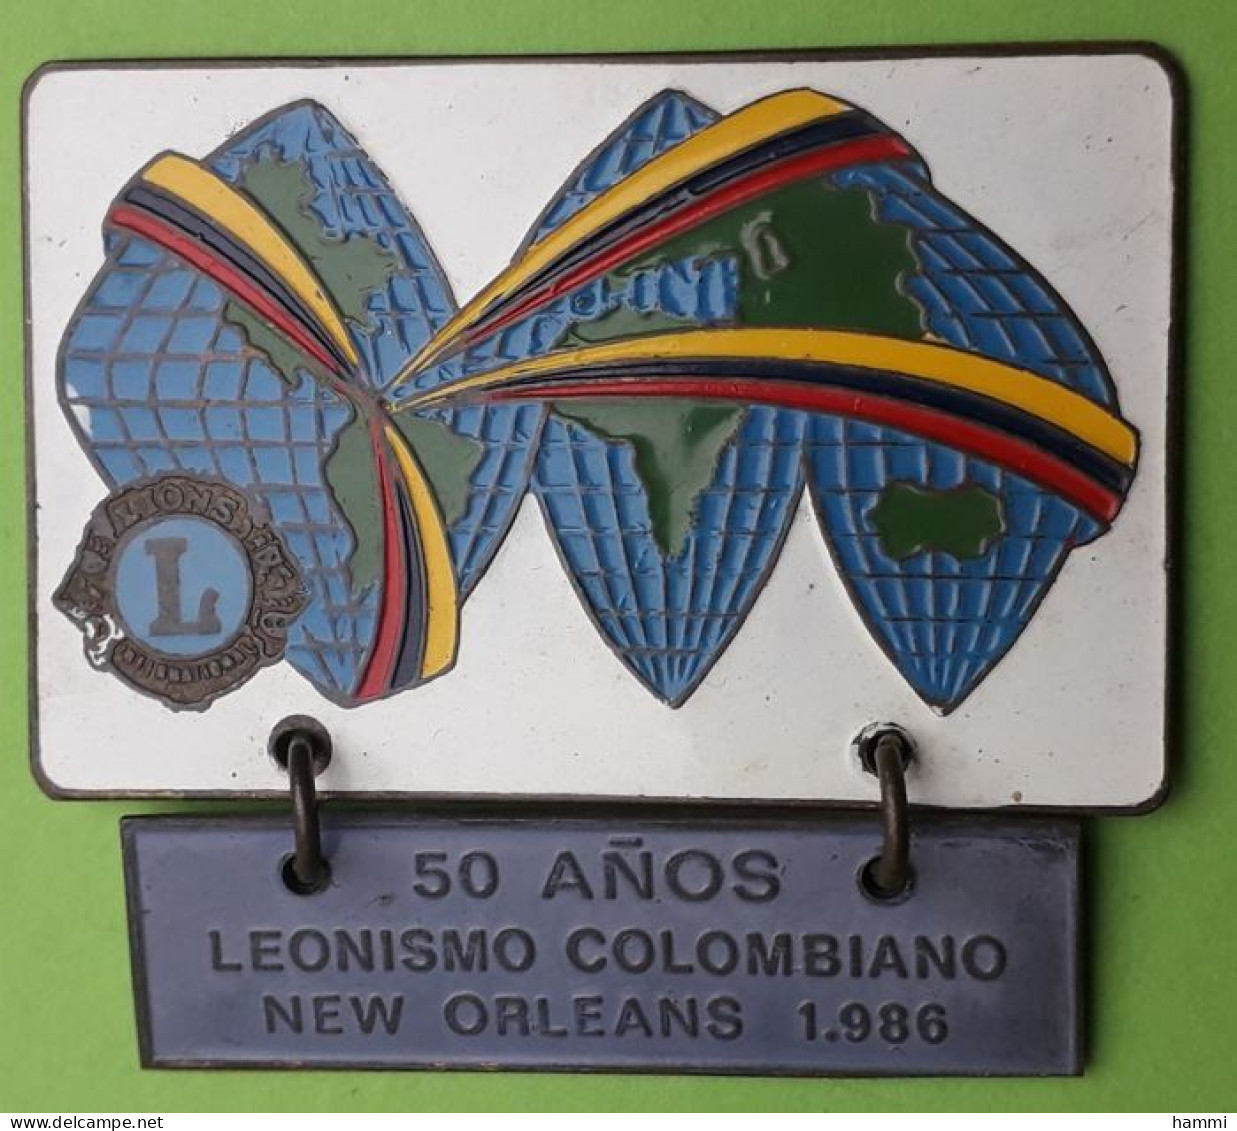 QQ605 Pin's Pendentif Lion's LIONS CLUB USA New Orleans 1986 Leonismo Colombiano Colombia 50 Ans 42x 40 Achat Fixe Fixe - Associations